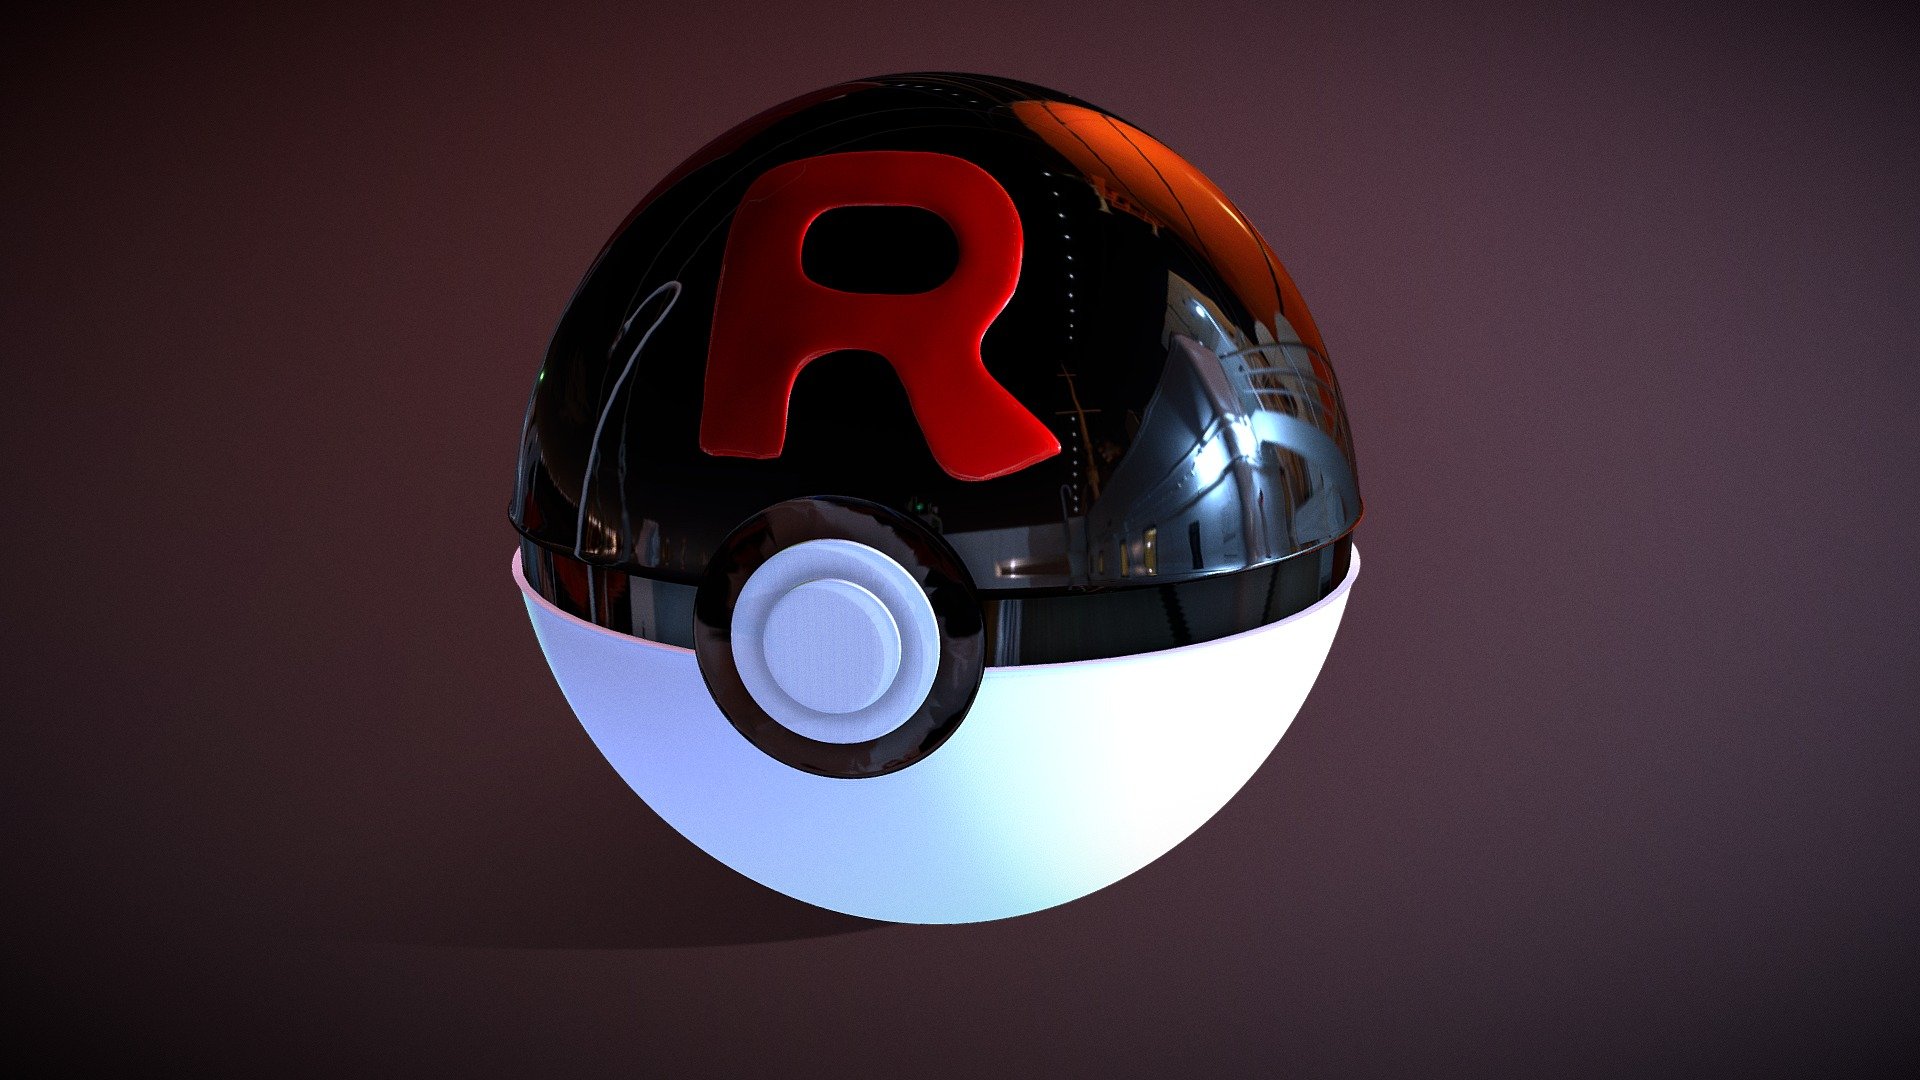 This is a project of 3D Model of Team Rocket's Pokeball to use on your project 3d model